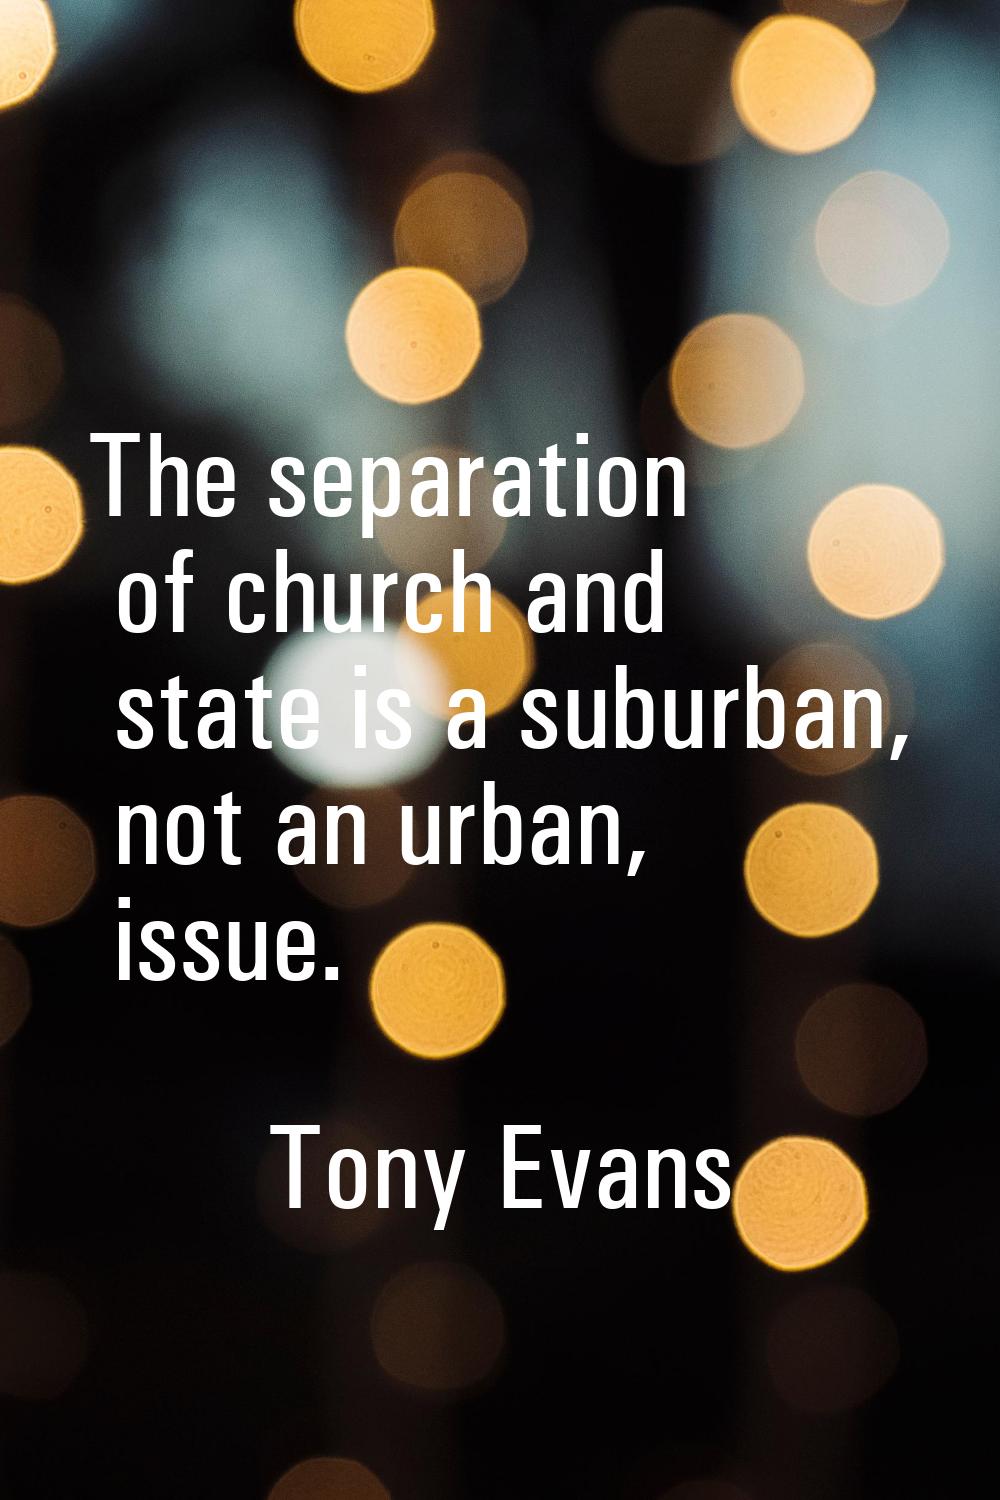 The separation of church and state is a suburban, not an urban, issue.